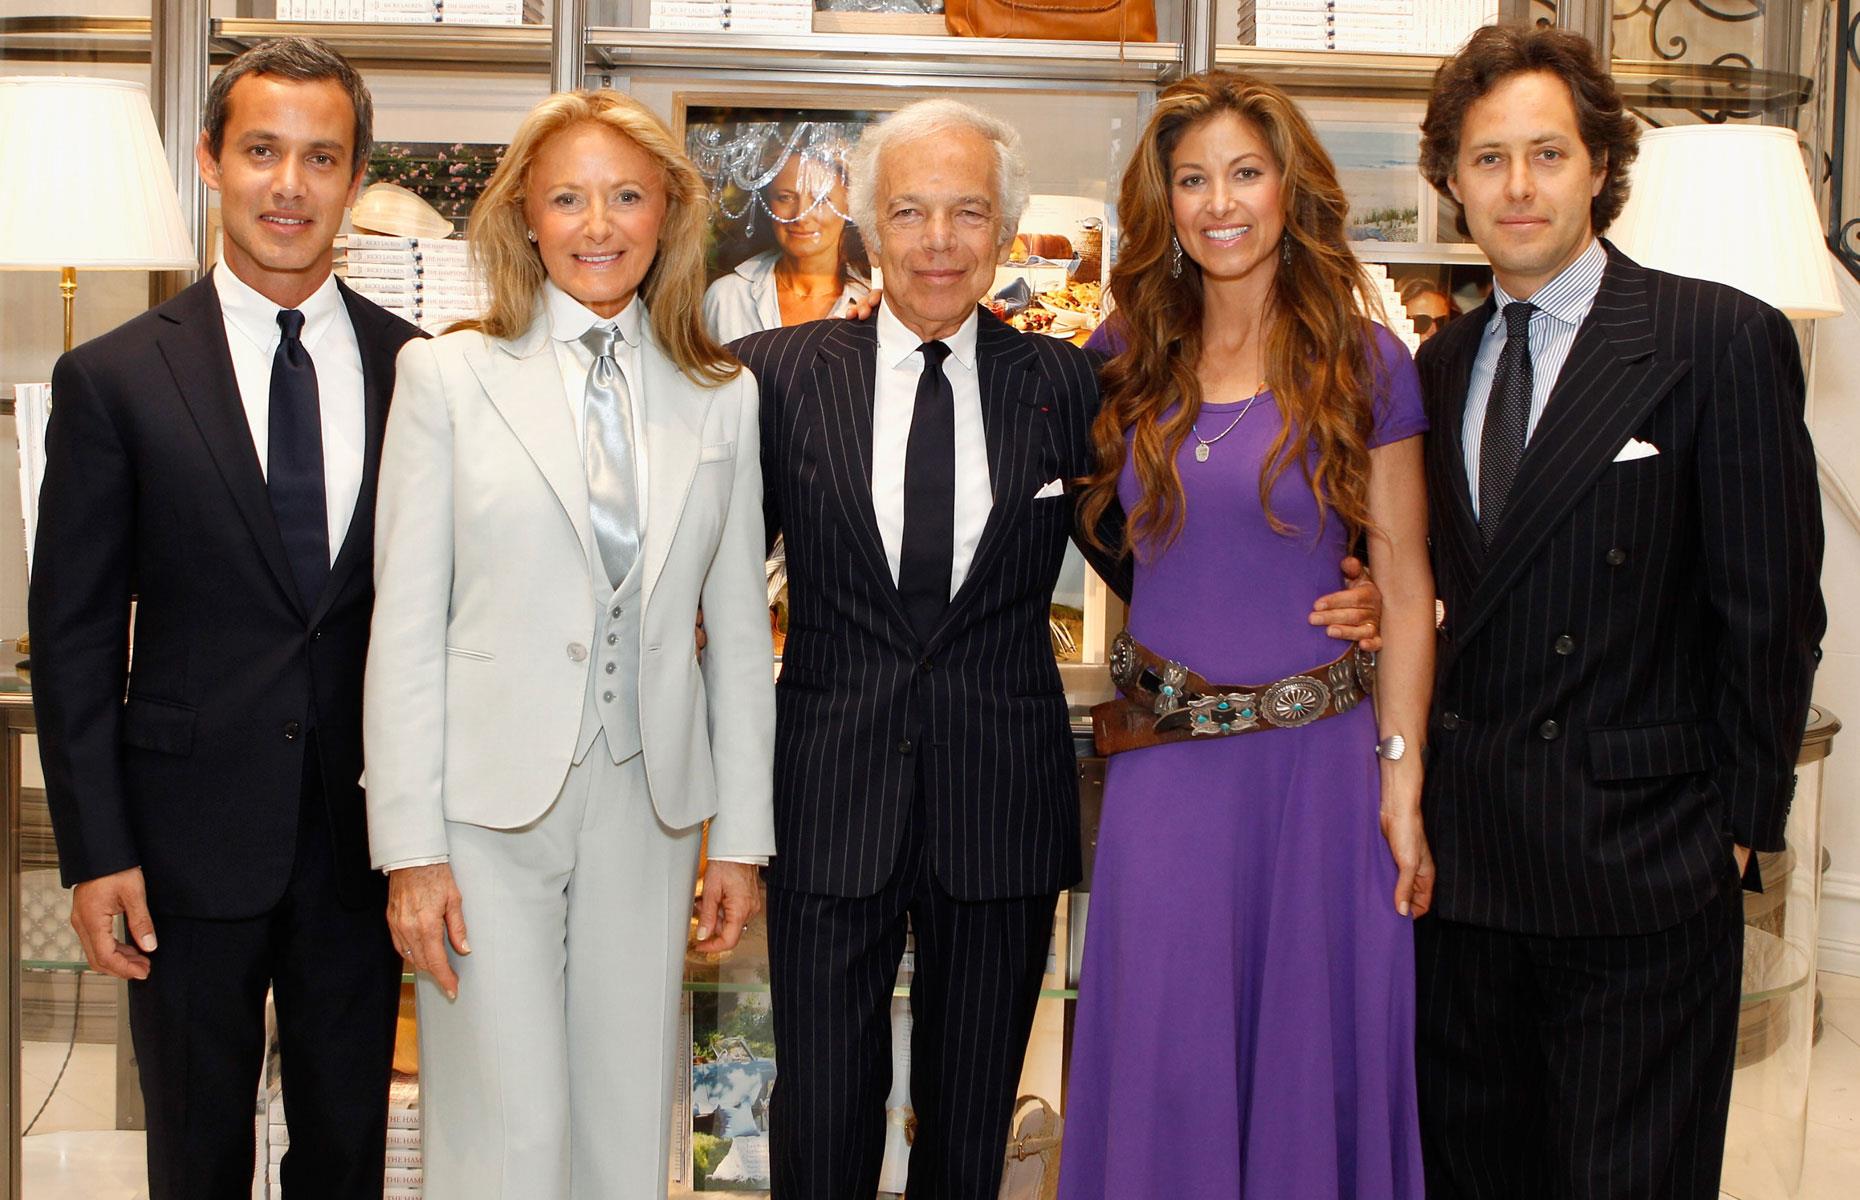 Ralph Lauren's Refined Houses and Chic Madison Avenue Office